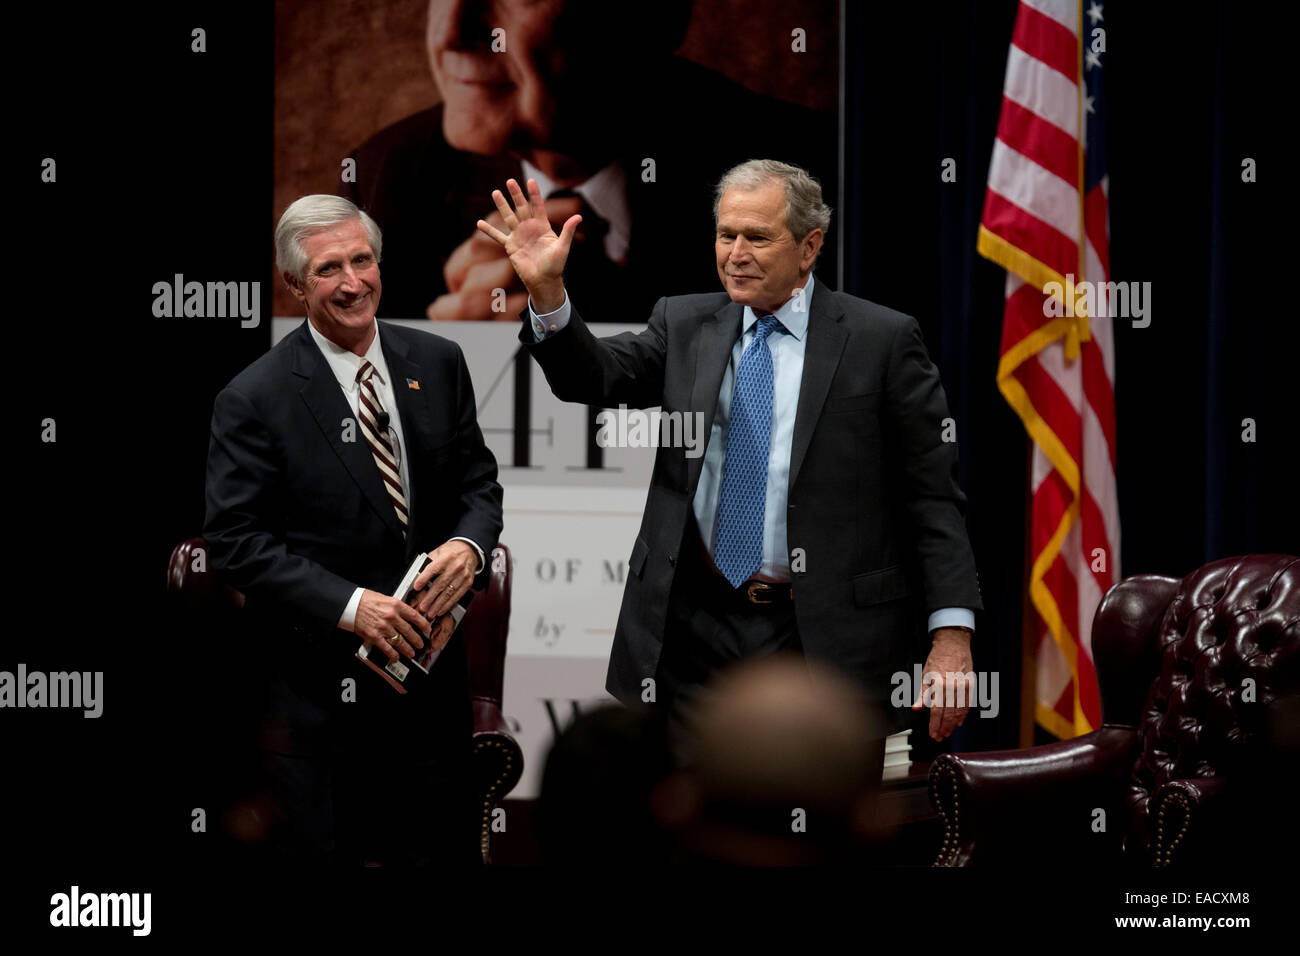 College Station, Texas, USA. 11th November, 2014. Former U.S. President George W. Bush, r,  waves after talking about his new book, '41 A Portrait of My Father' wiith former chief of staff Andrew Card during a book event at the Bush Library at Texas A&M University. The elder George H.W. Bush and wife Barbara were in the audience. Credit:  Bob Daemmrich/Alamy Live News Stock Photo